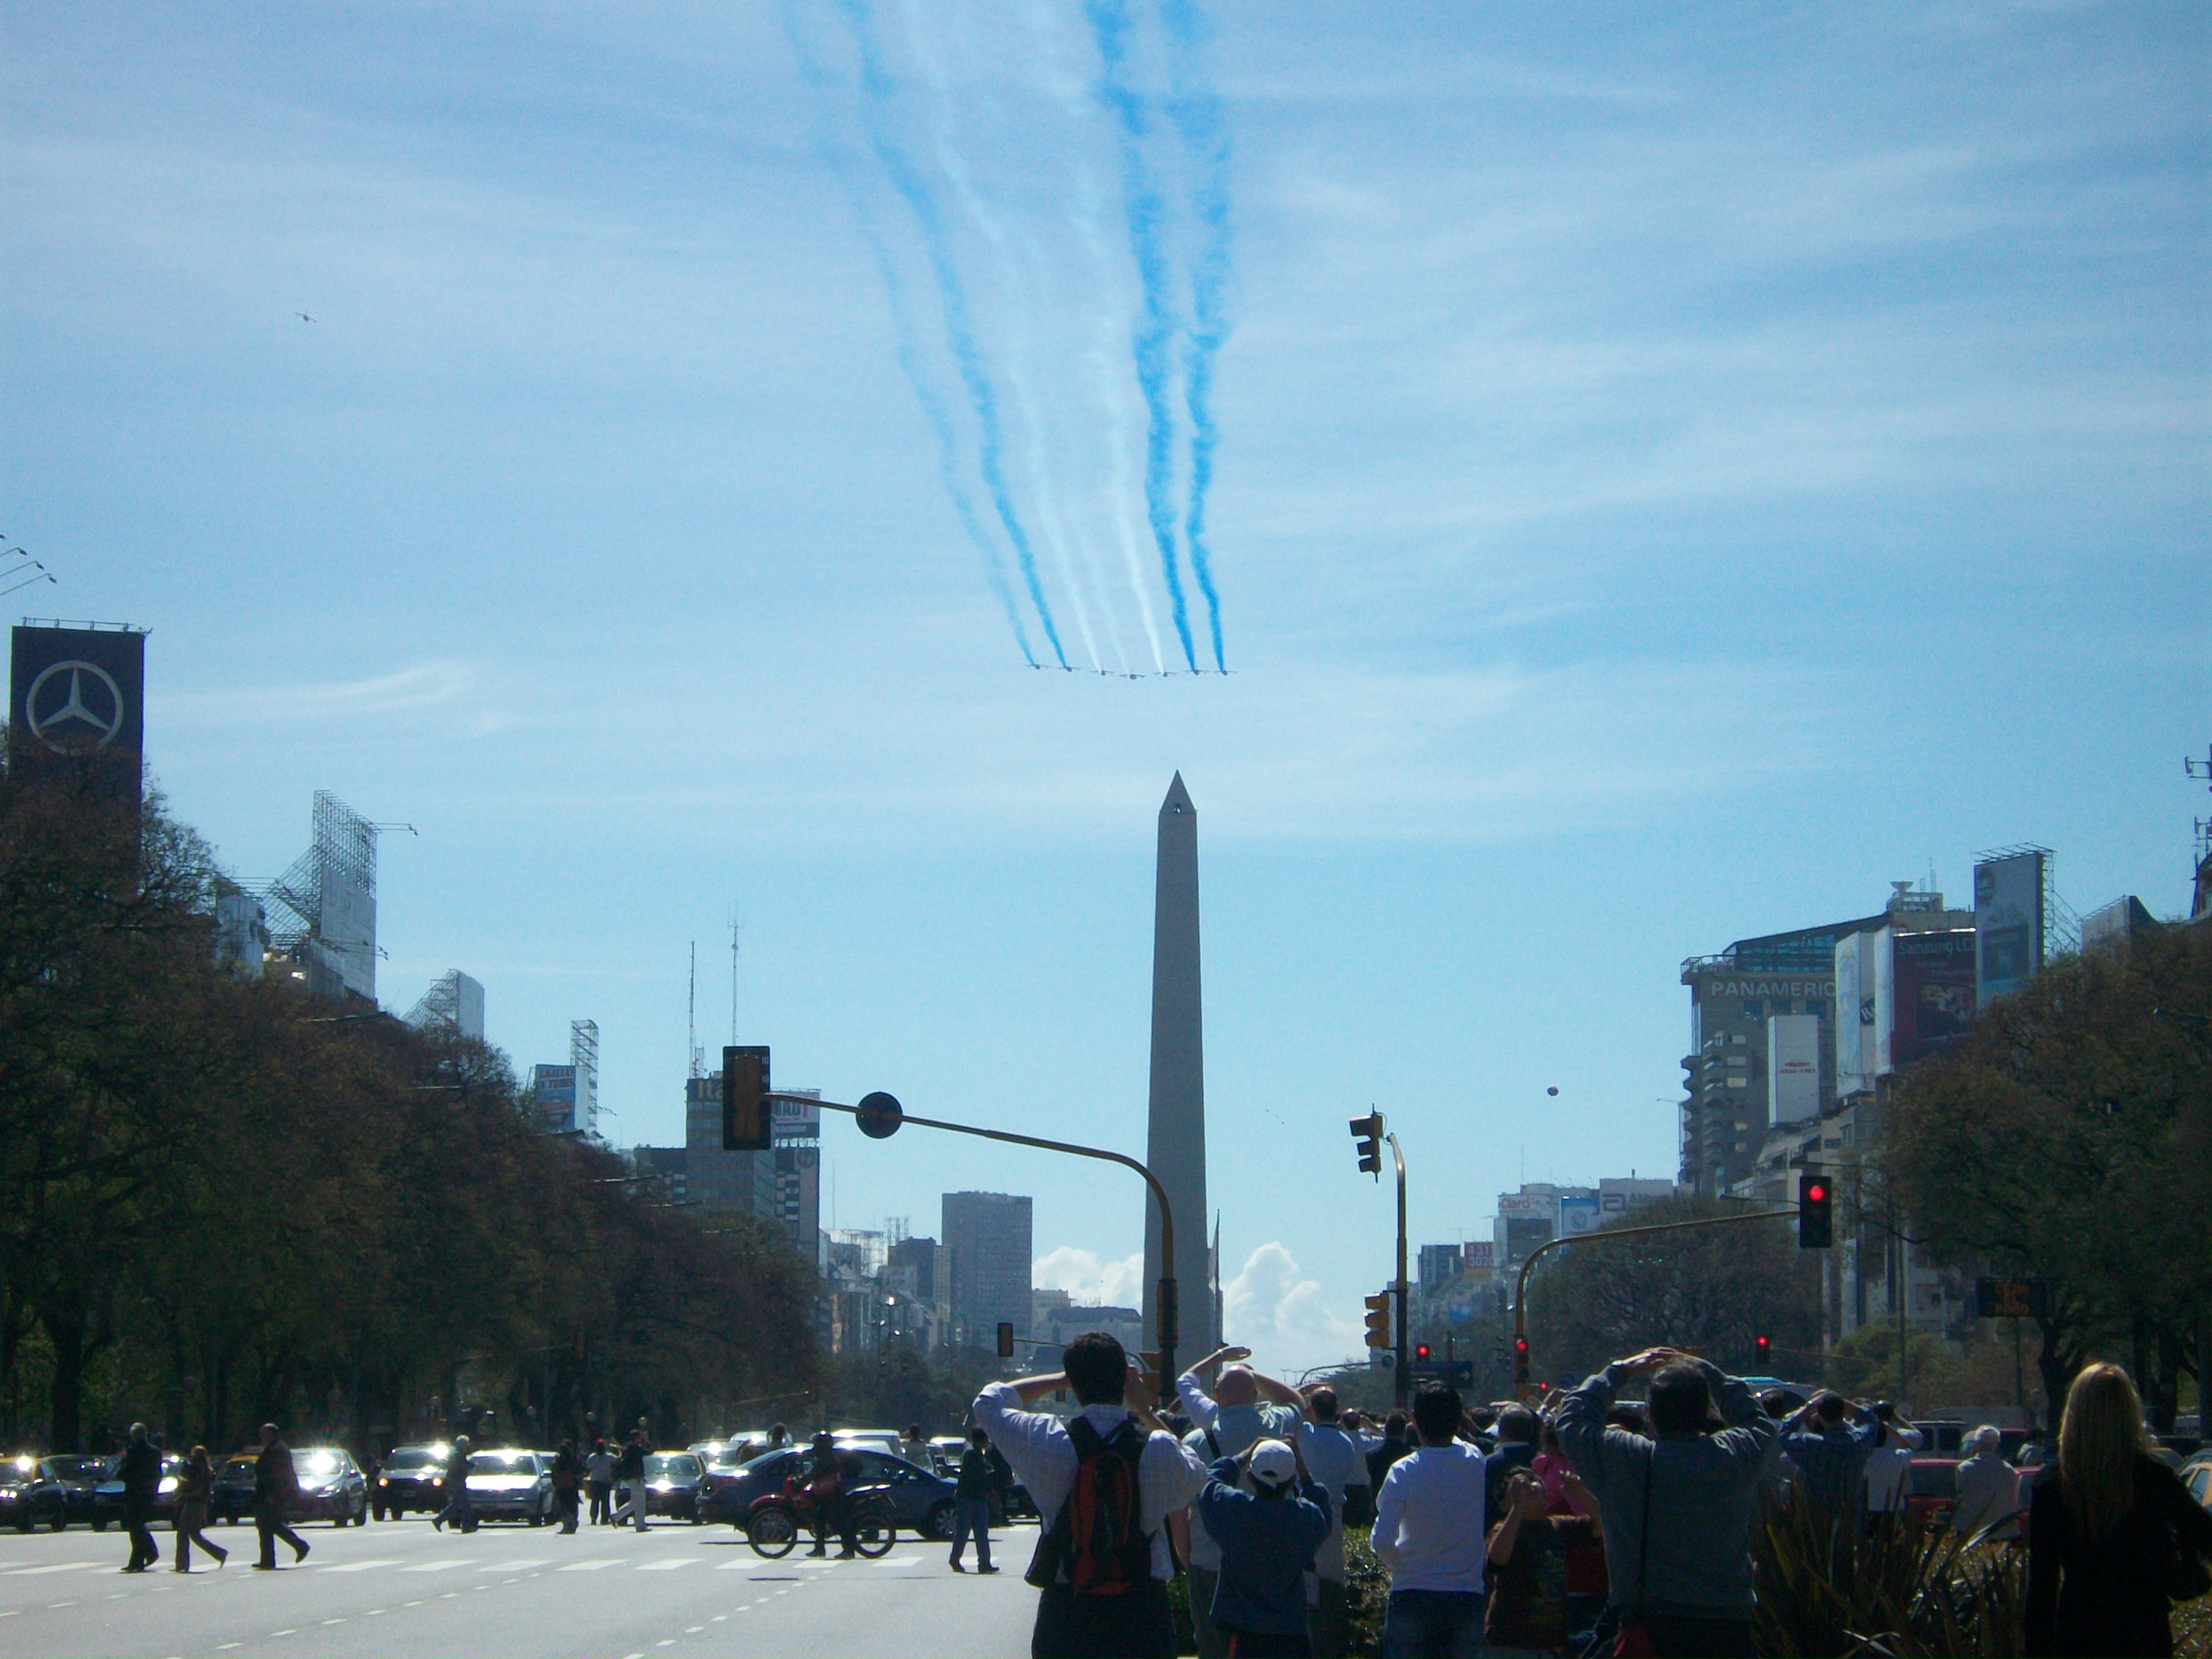 Air festival in Buenos Aires